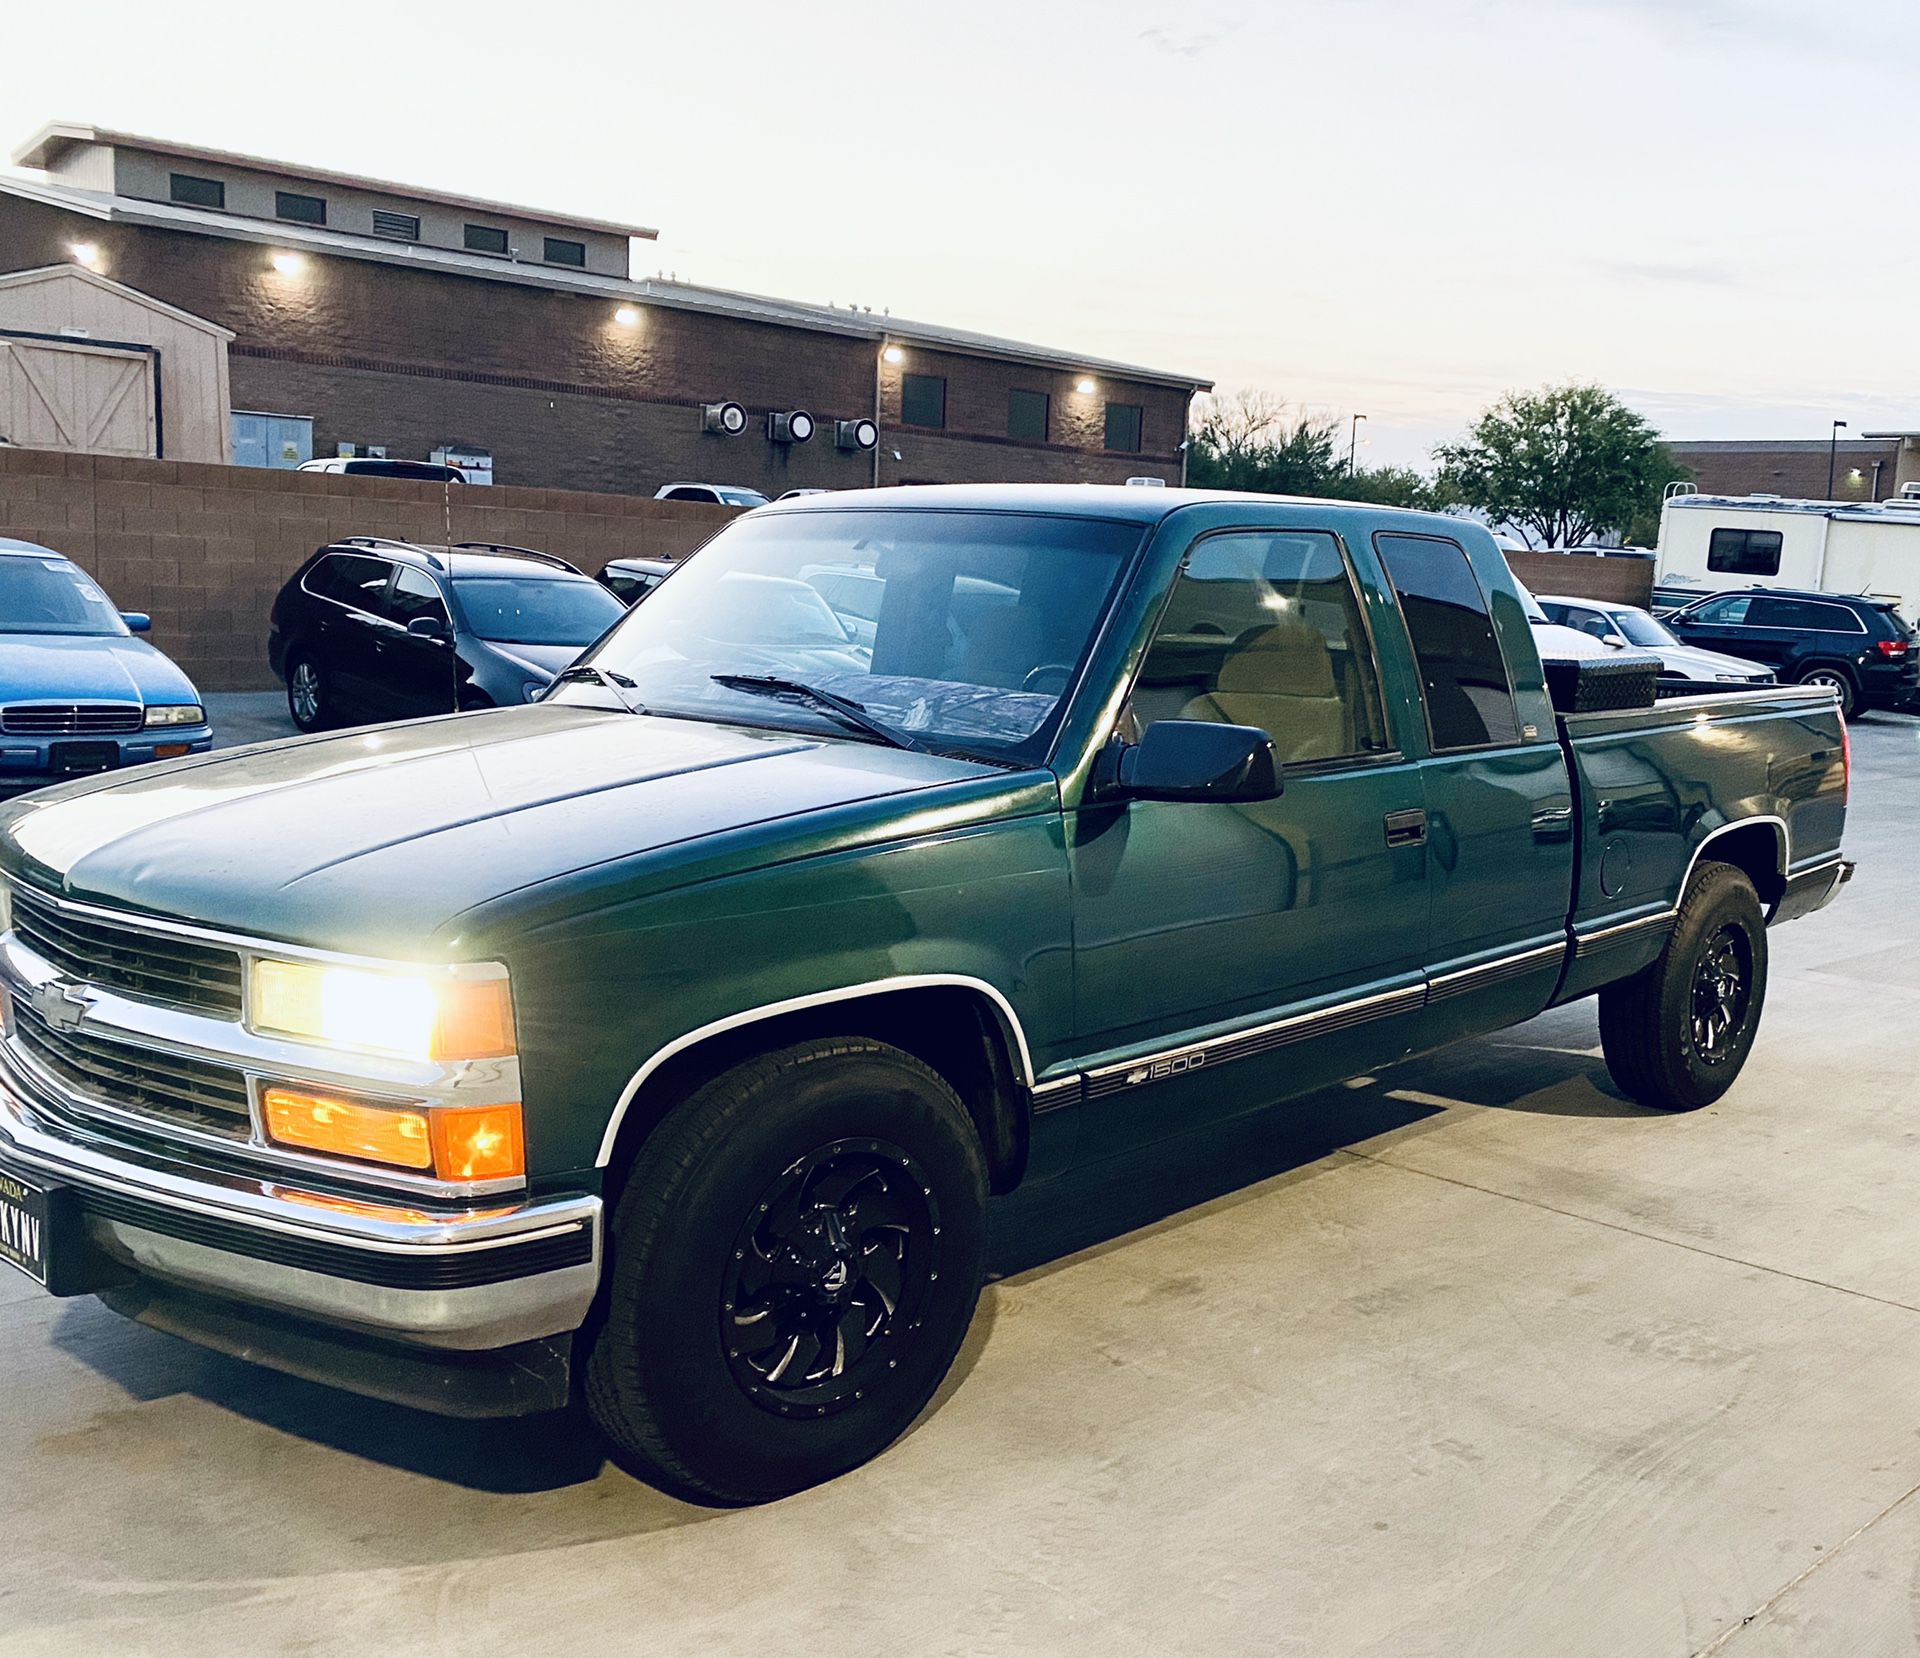 1998 Chevy Silverado Extended Cab 5.7L V8 2WD long bed